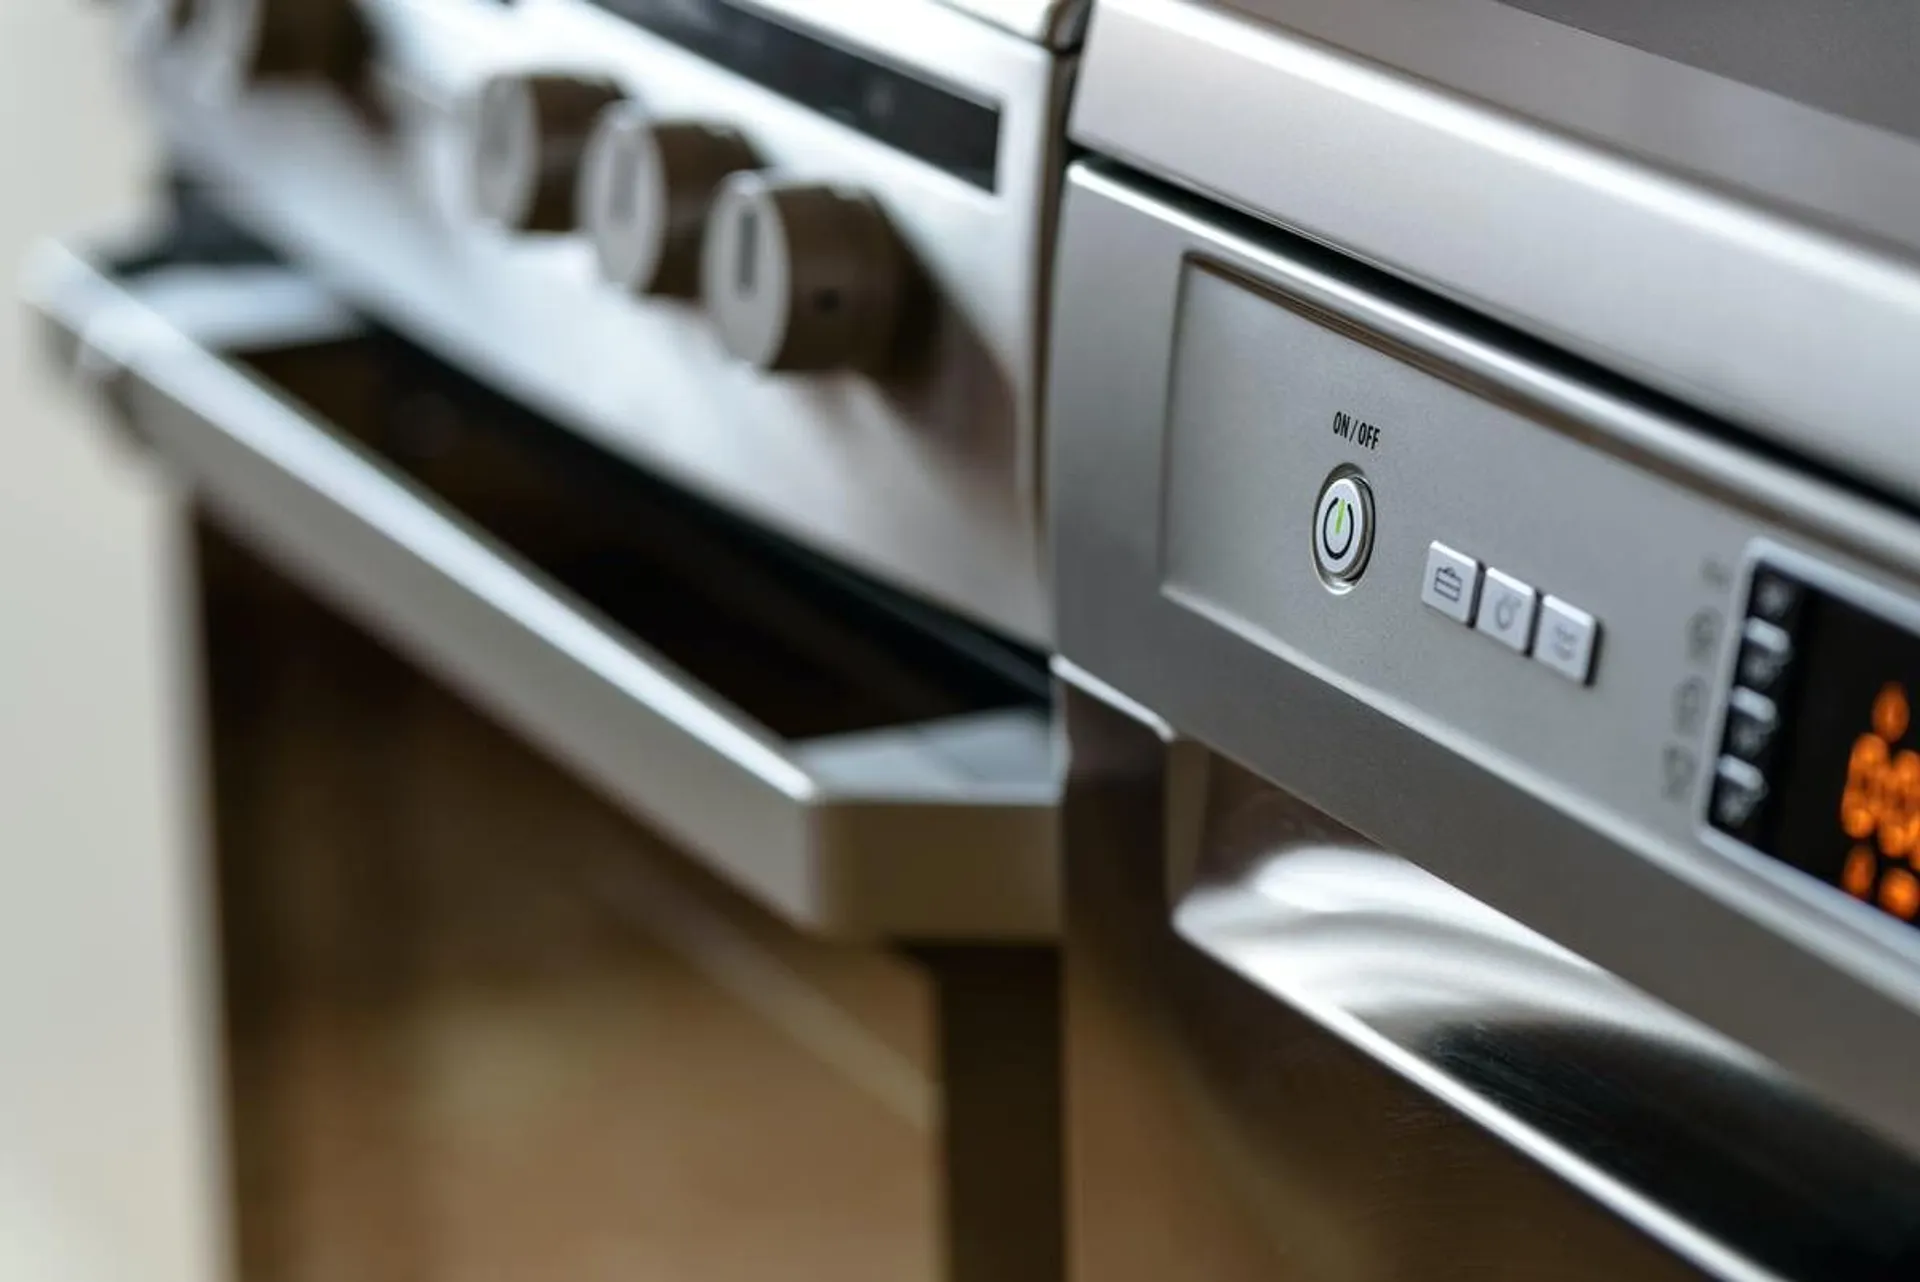 Affordable home appliances: How to pick the right one? 